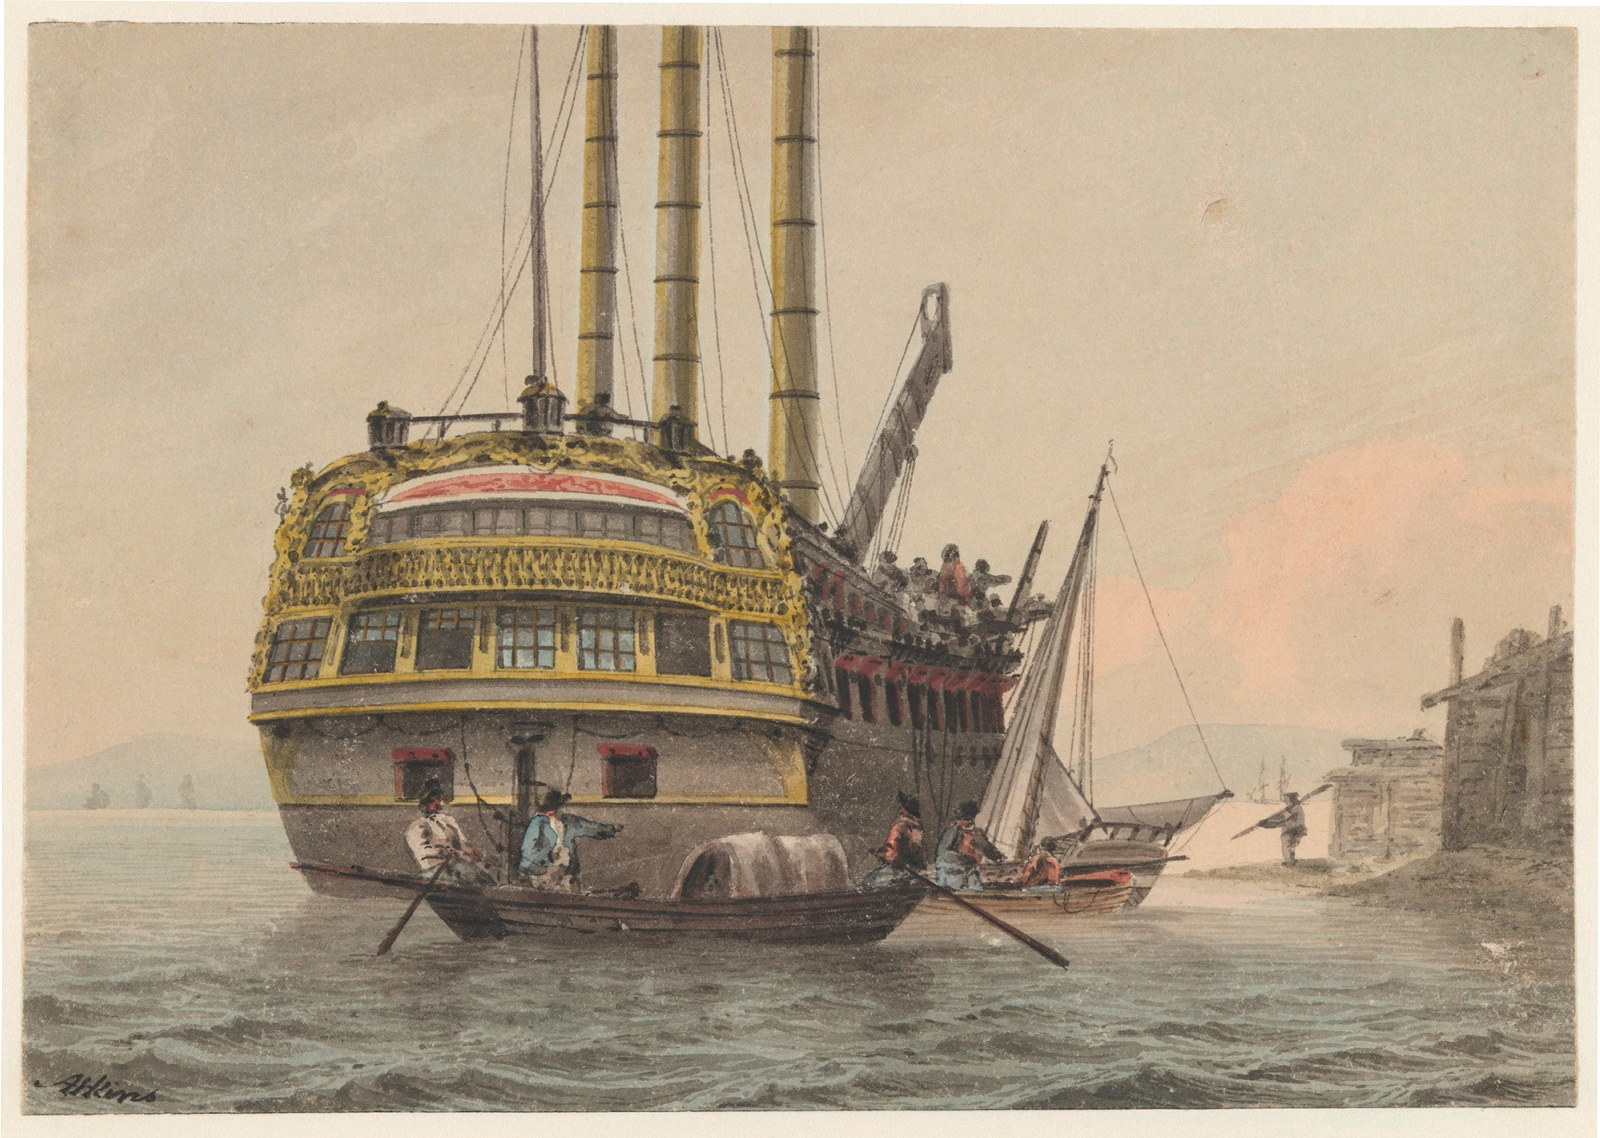 Watercolour of convict hulk with smaller boats carrying convicts in foreground